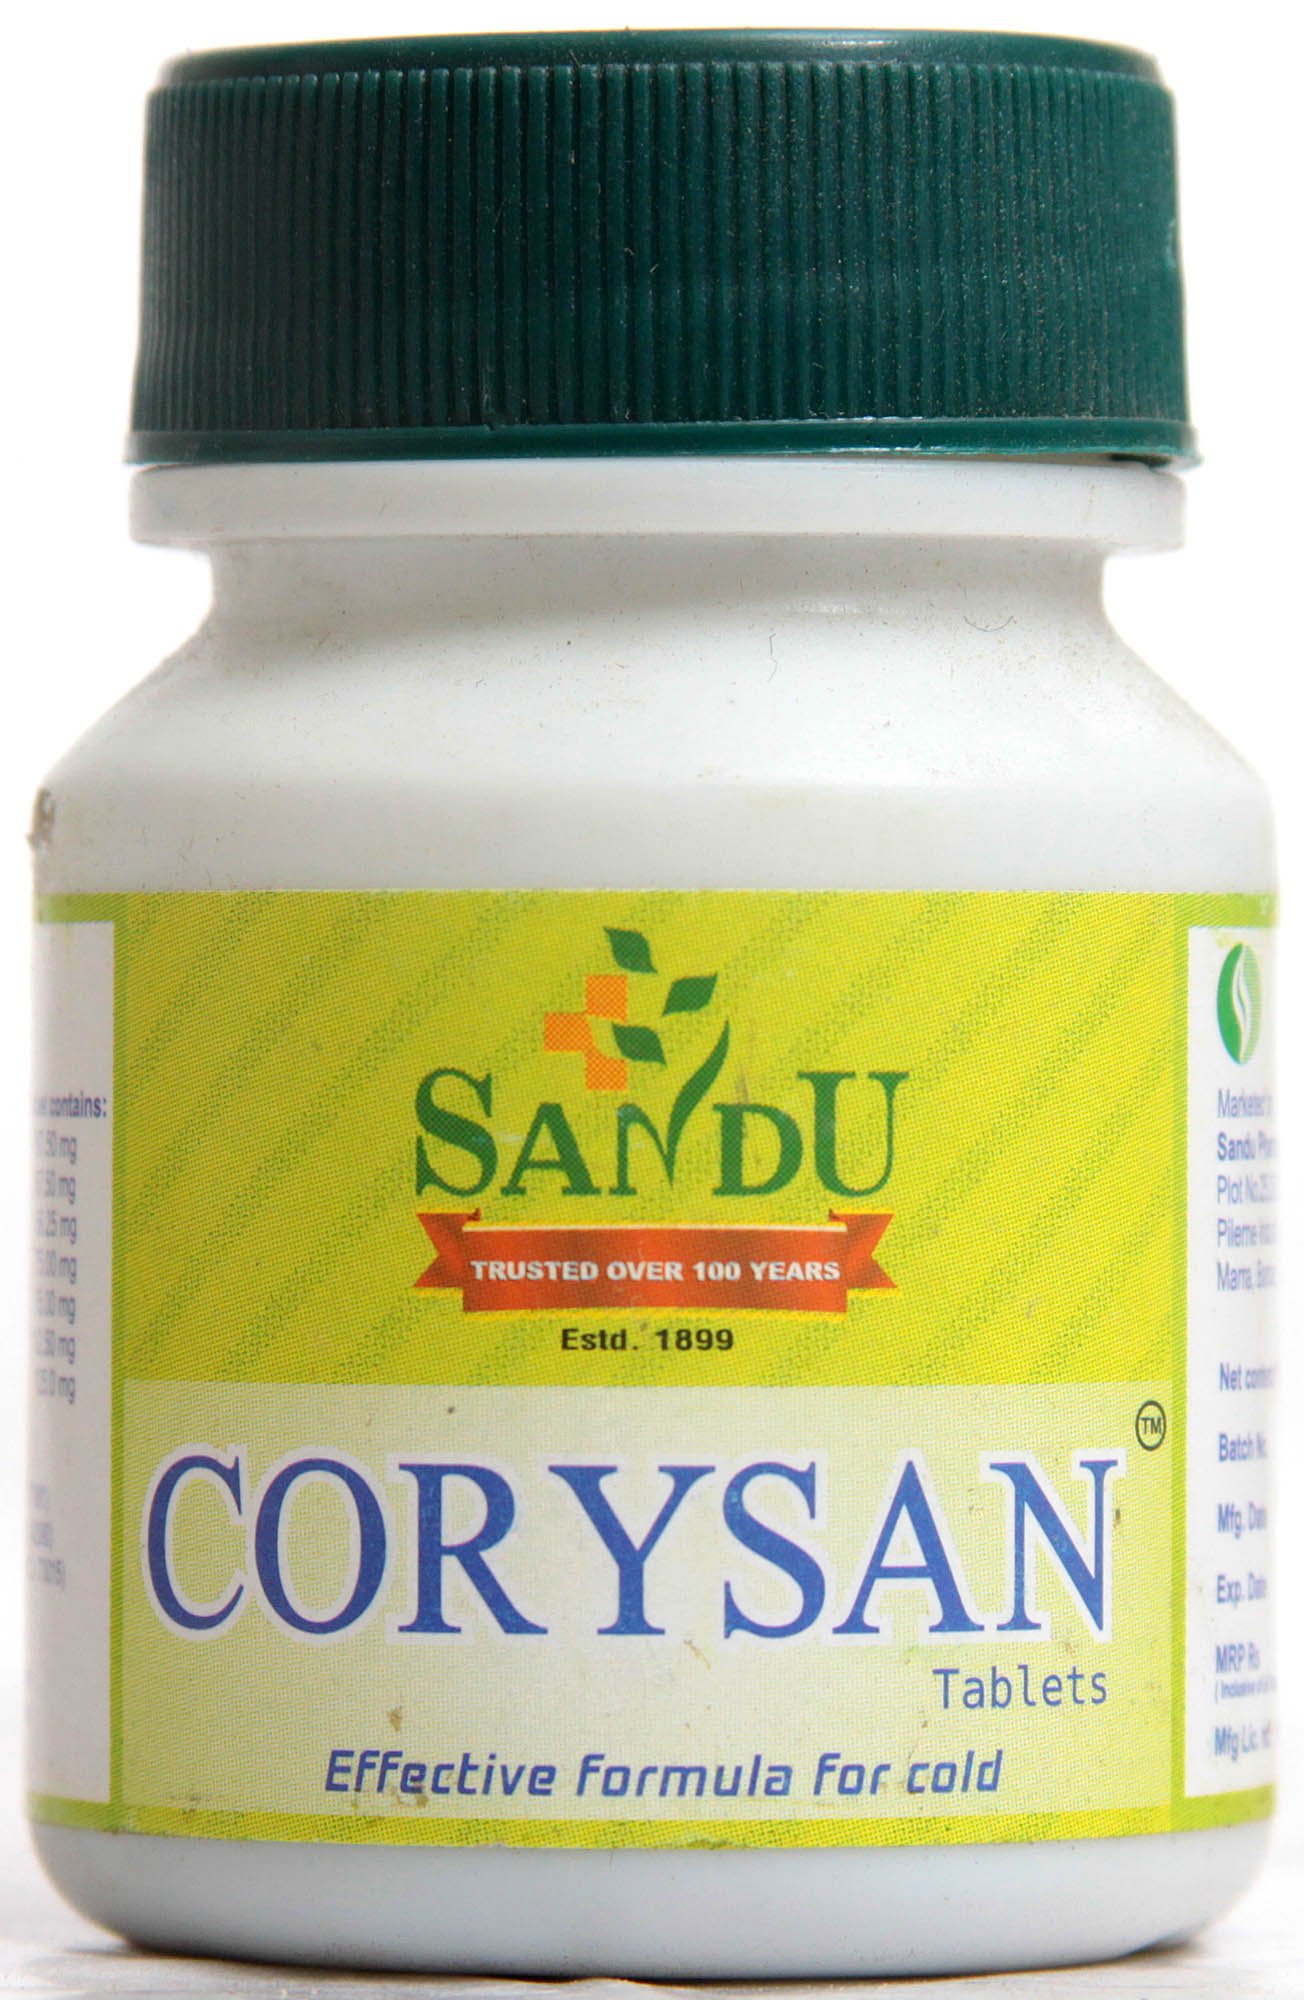 Corysan Tablets - book cover